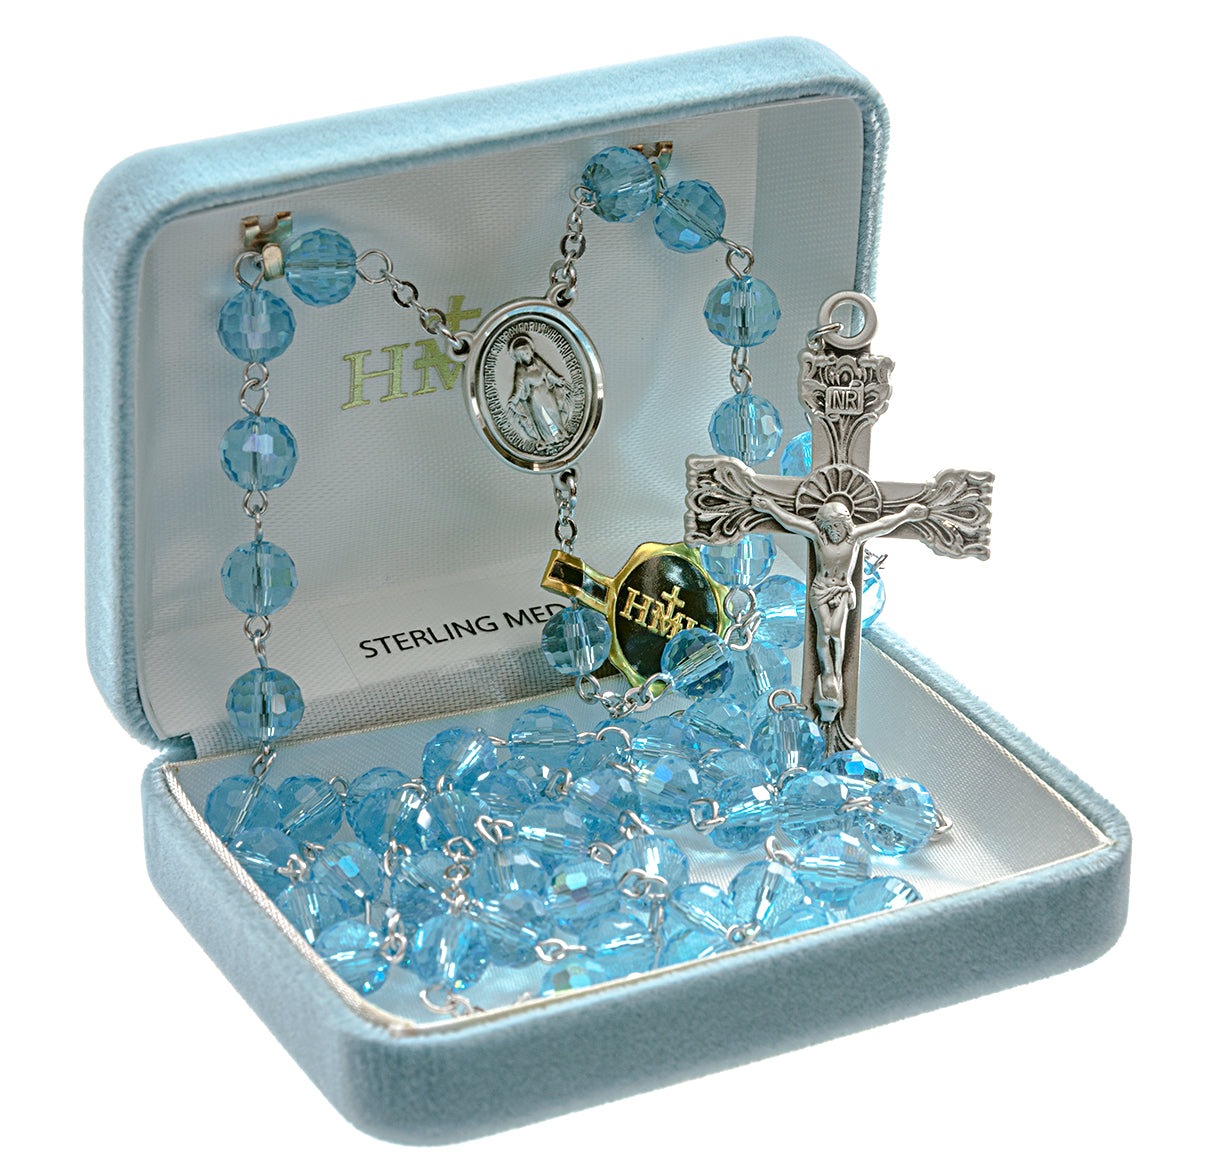 Rosary Sterling Crucifix and Centerpiece Created with Swarovski Crystal 8mm Multi-Faceted Aqua Beads by HMH